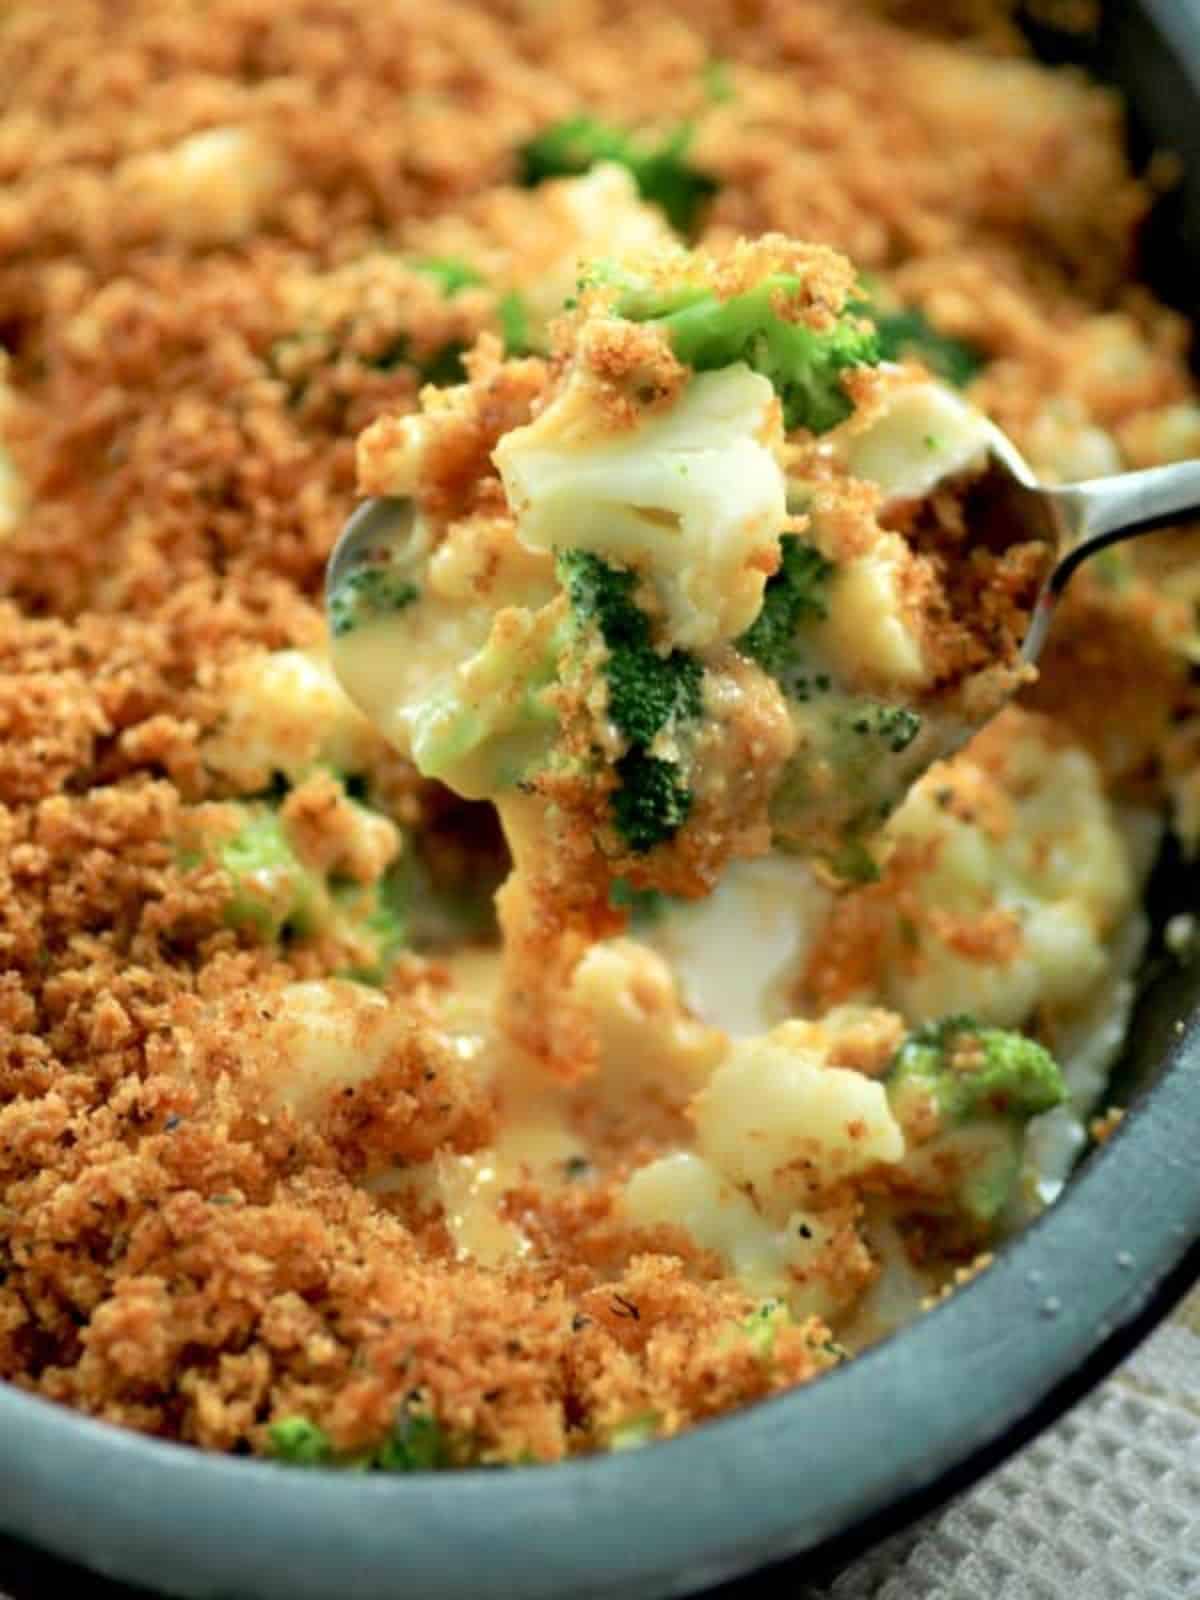 Broccoli Cauliflower Cheese Bake in a blue casserole scooped by a spoon.